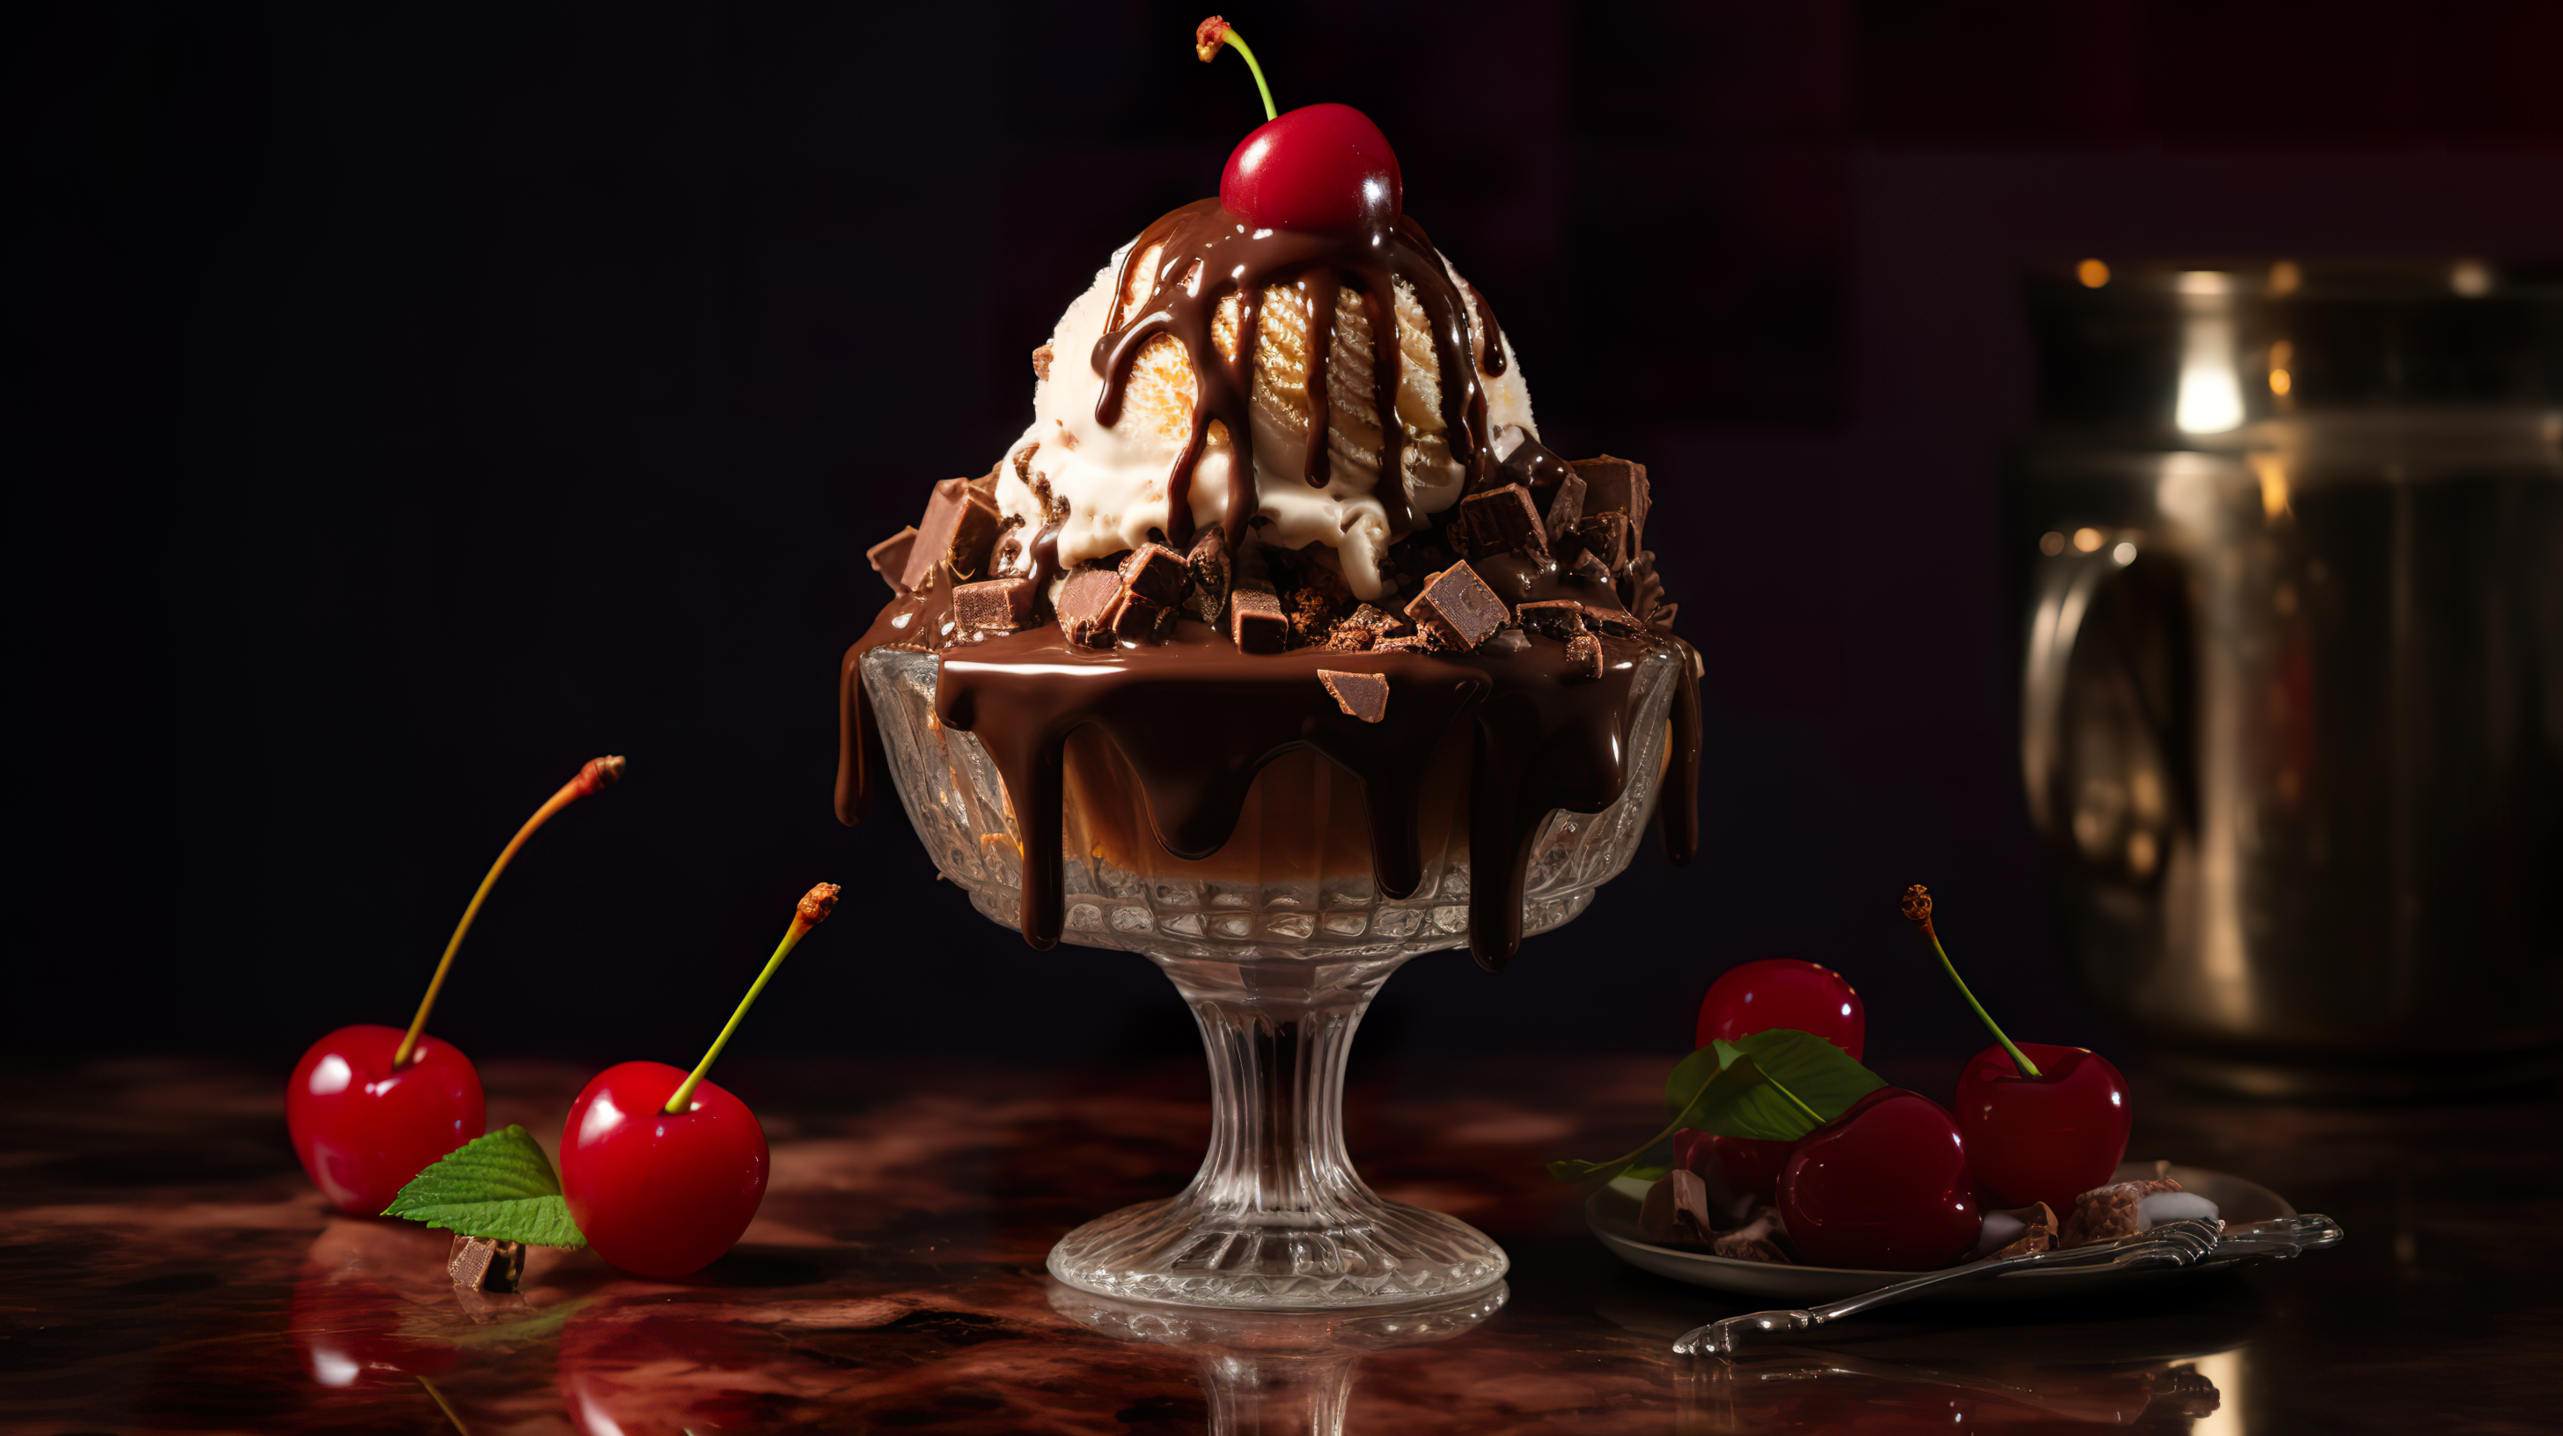 Decadent chocolate sundae topped with whipped cream and a cherry, surrounded by fresh cherries, perfect for an HD ice cream-themed desktop wallpaper.